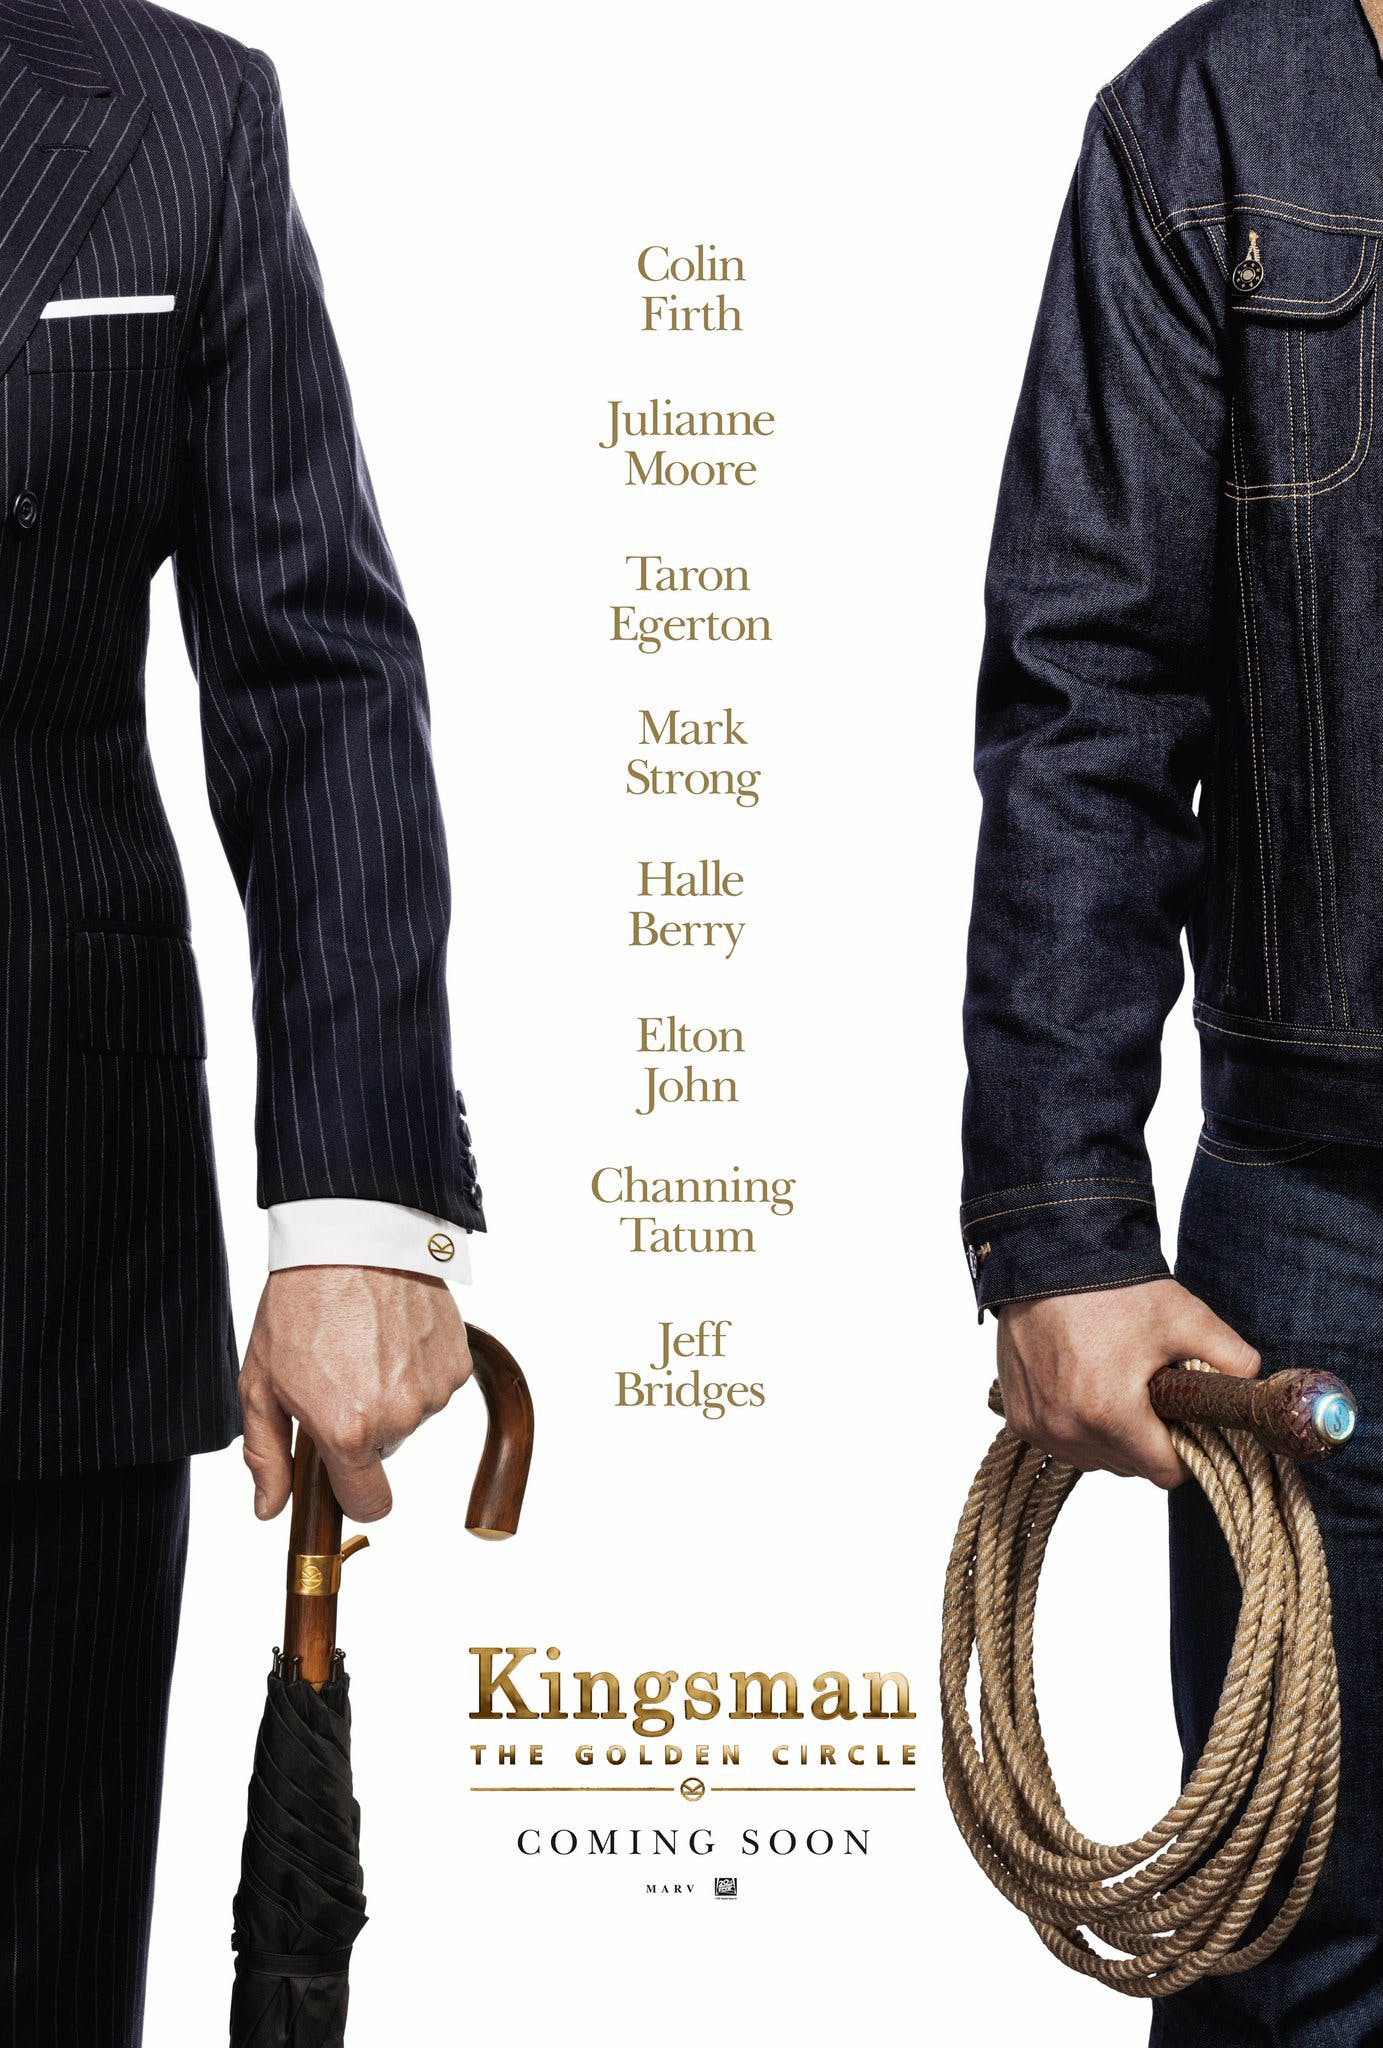 Teaser poster artwork for the upcoming release of Kingsman: The Golden Circle starring Colin Firth